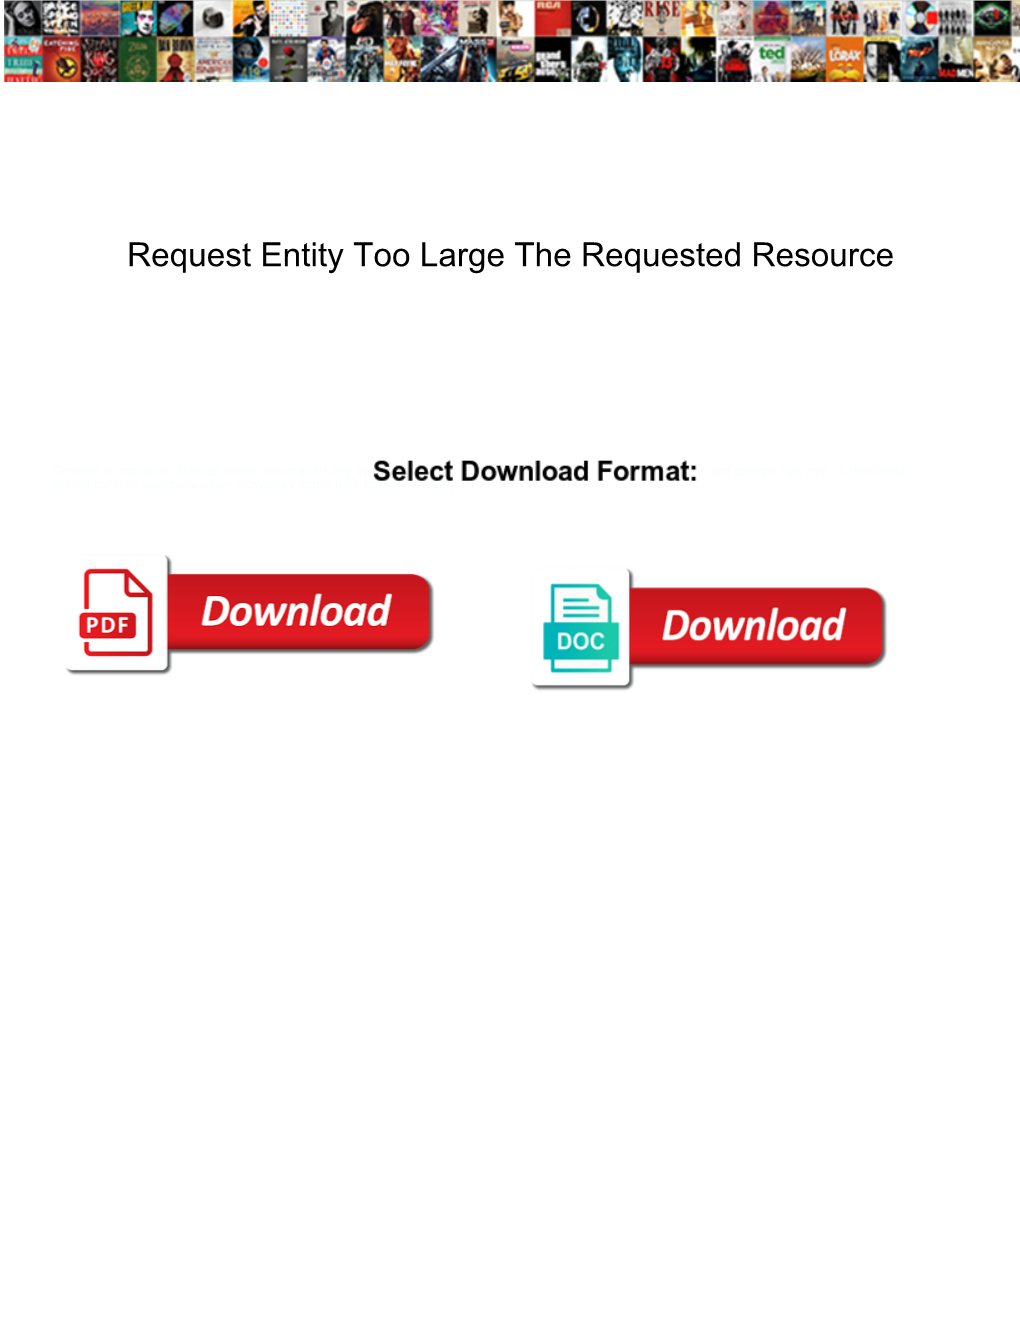 Request Entity Too Large the Requested Resource